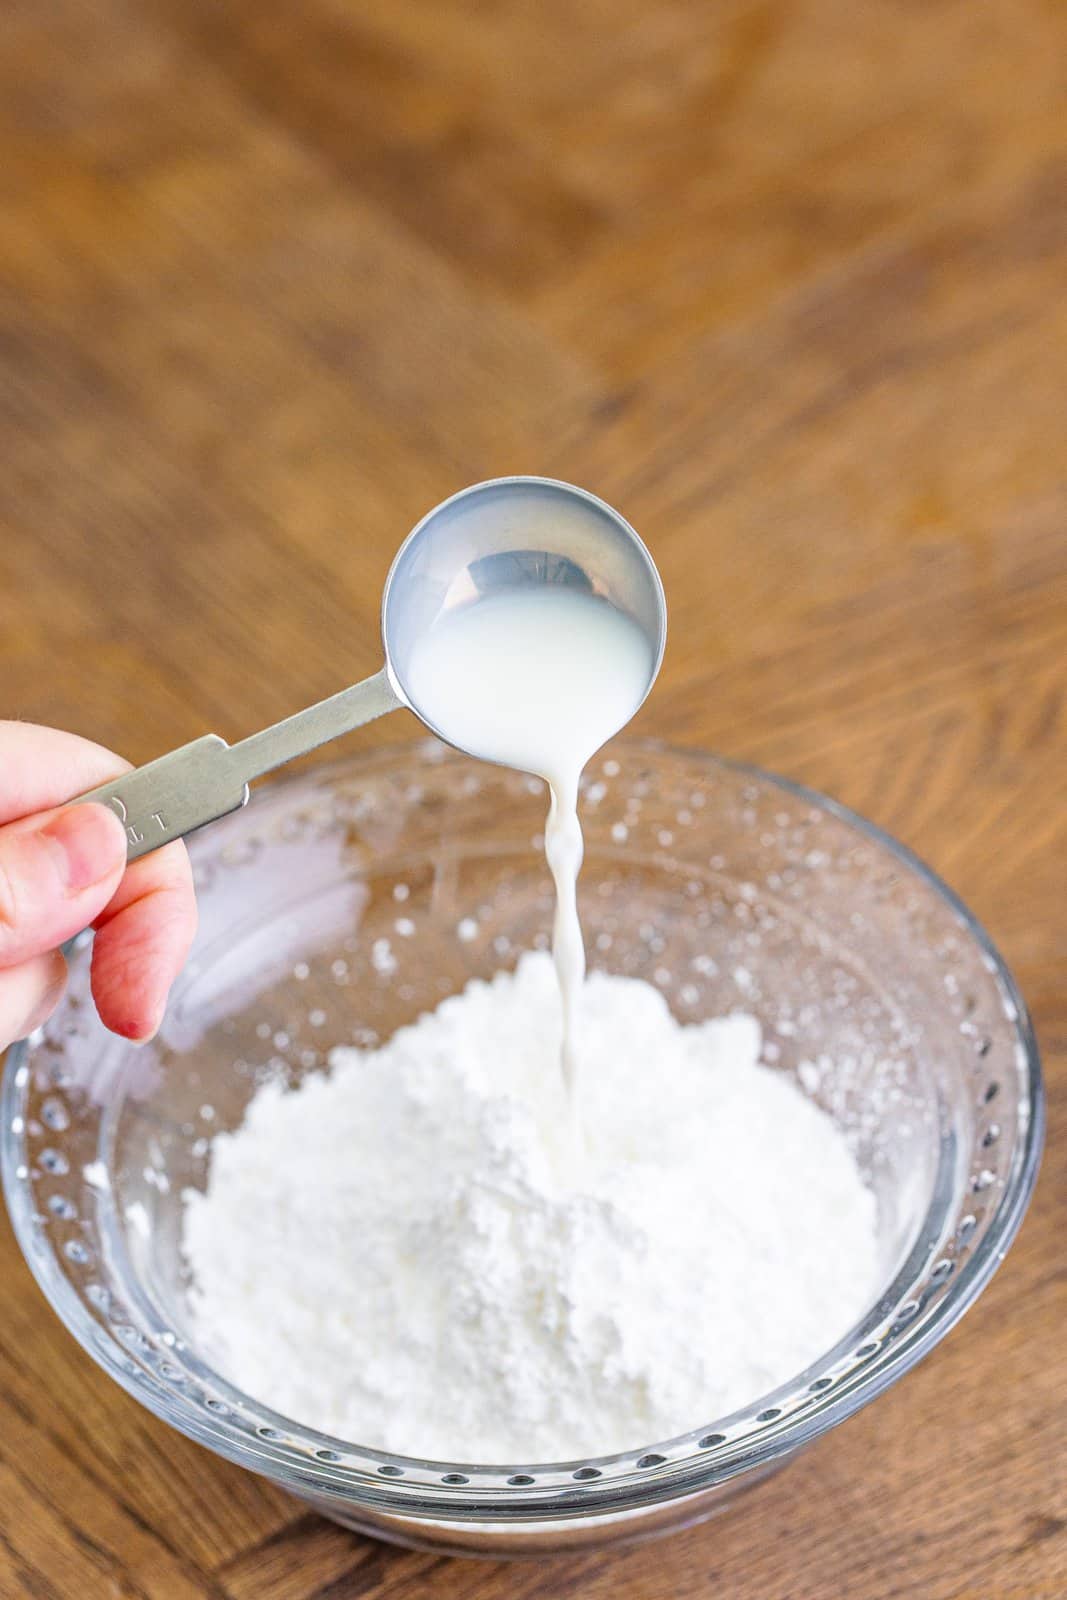 a measuring spoon pouring milk into the powdered sugar in a bowl.